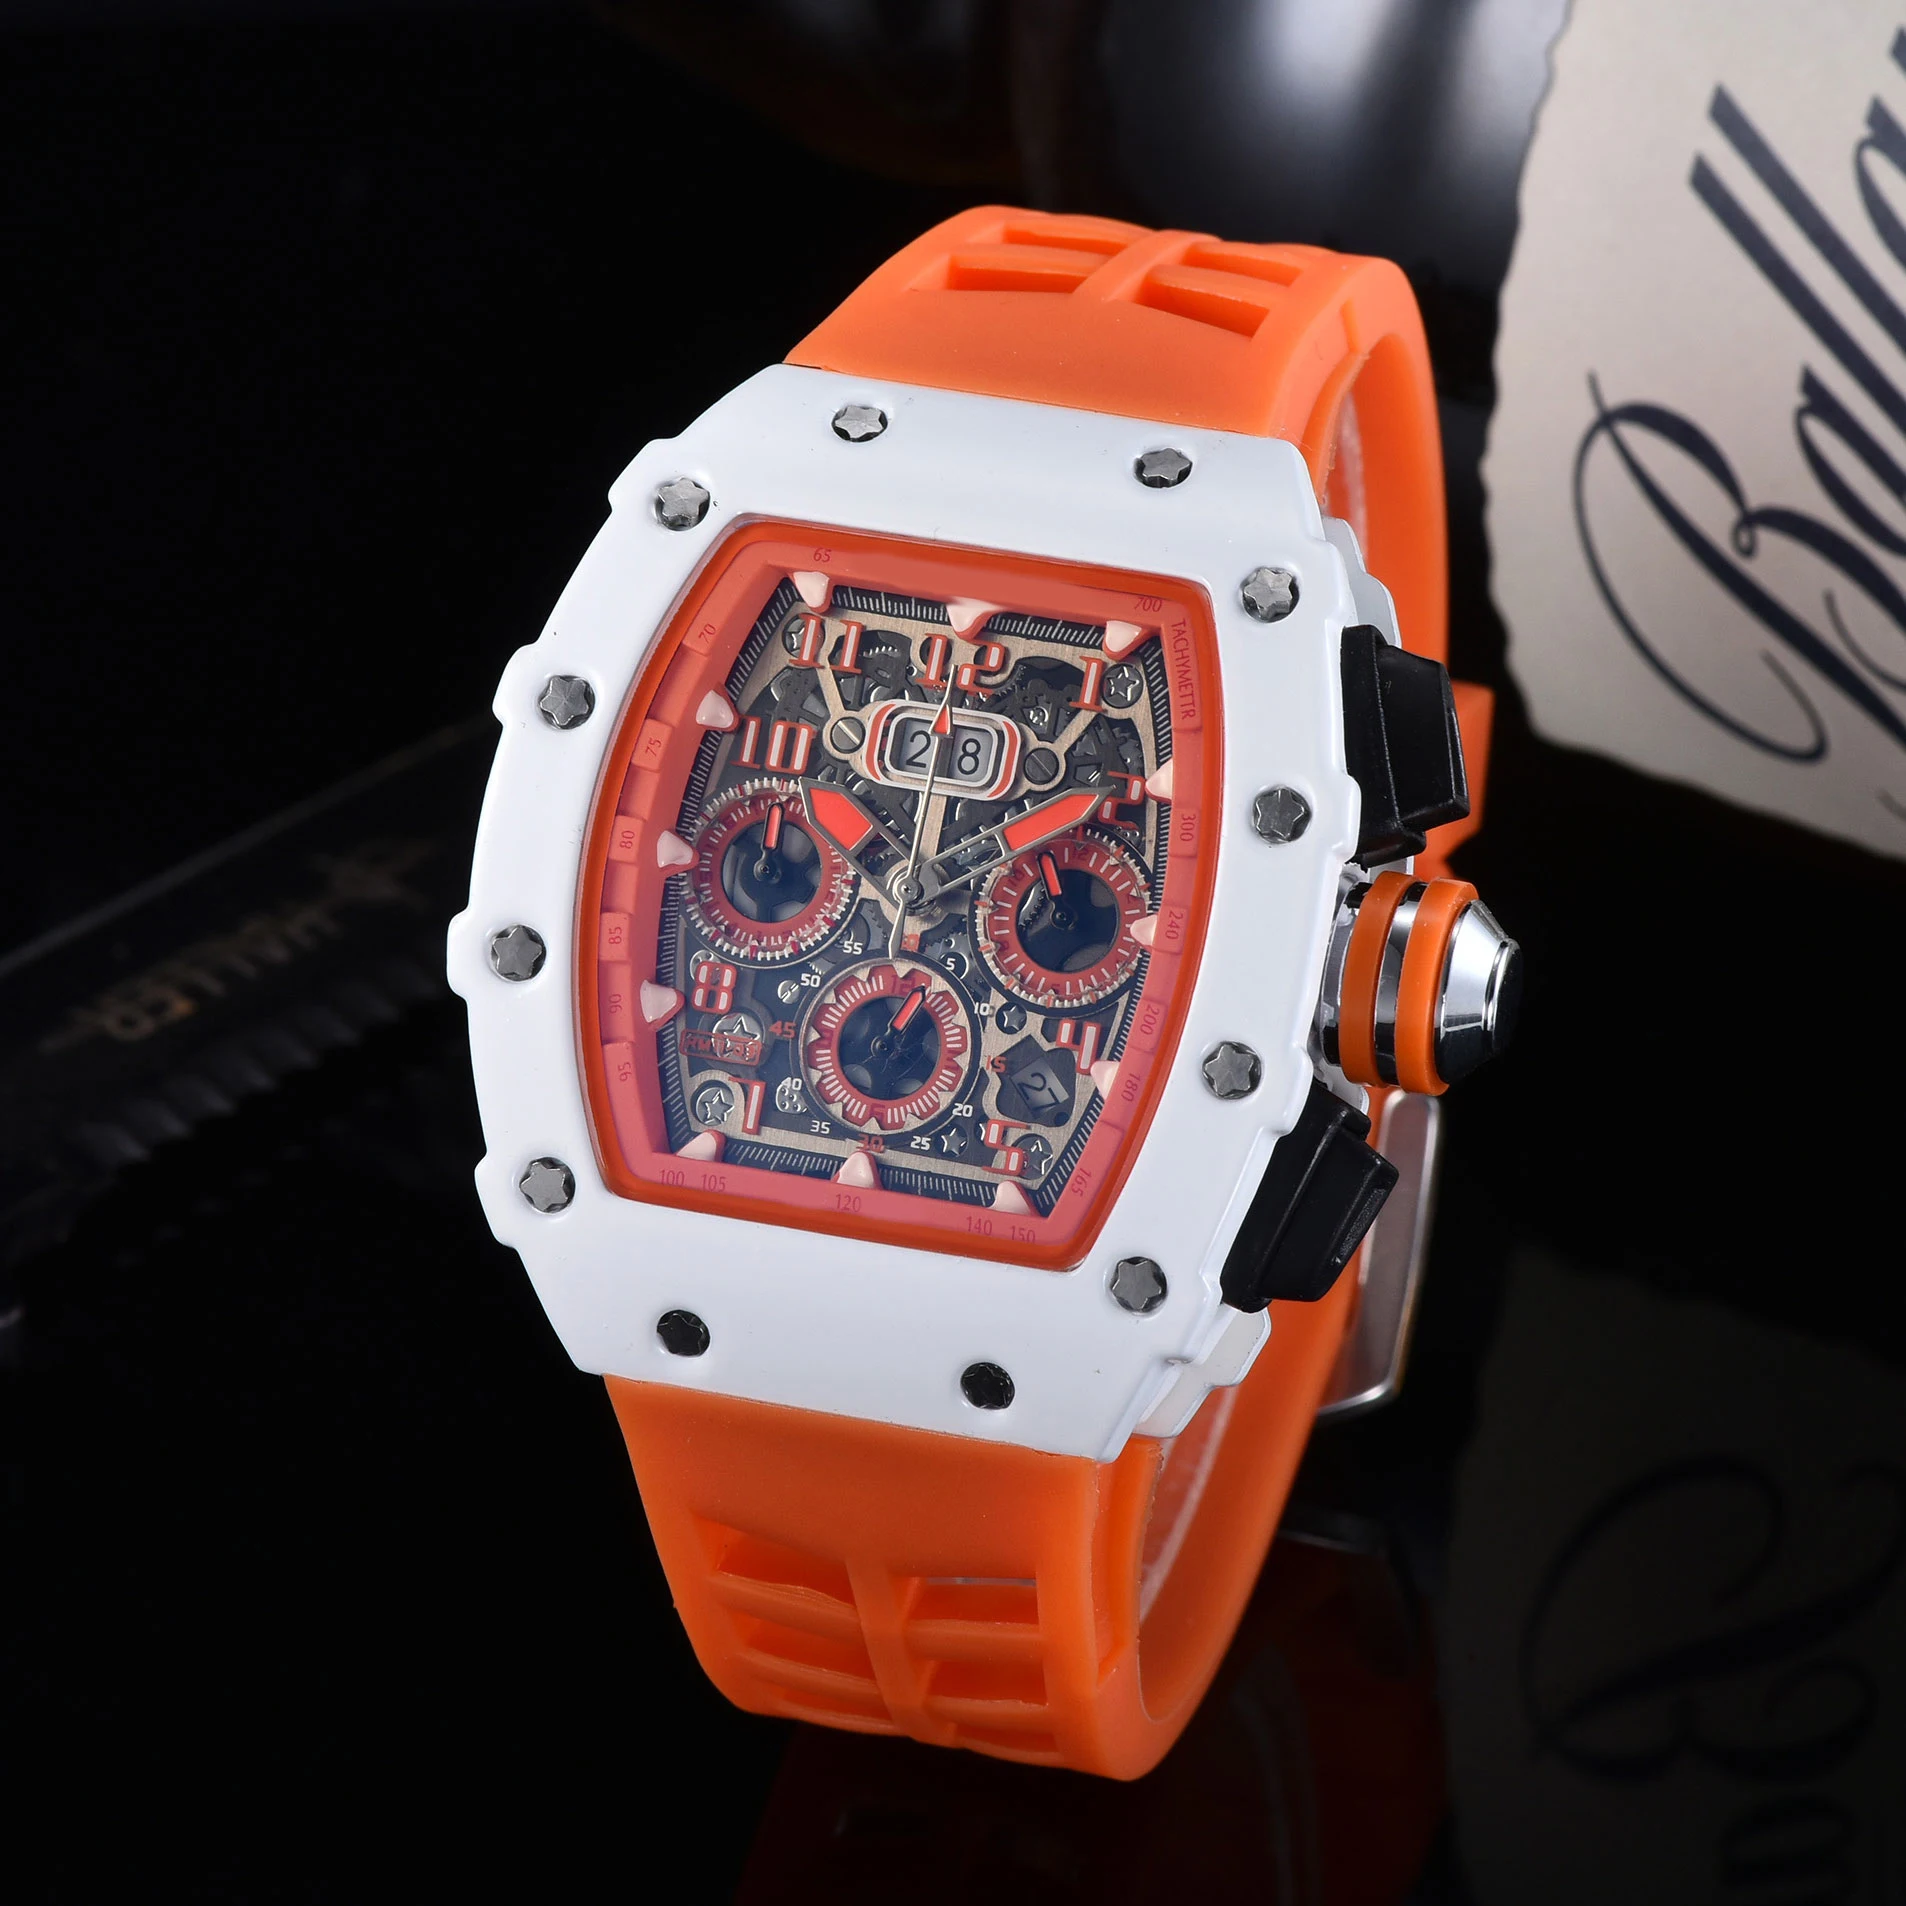 

Hot Selling Quartz RM Watch For Men Casual Sport WristWatch Man Watches Top Brand Luxury Fashion Chronograph Silicone Brand